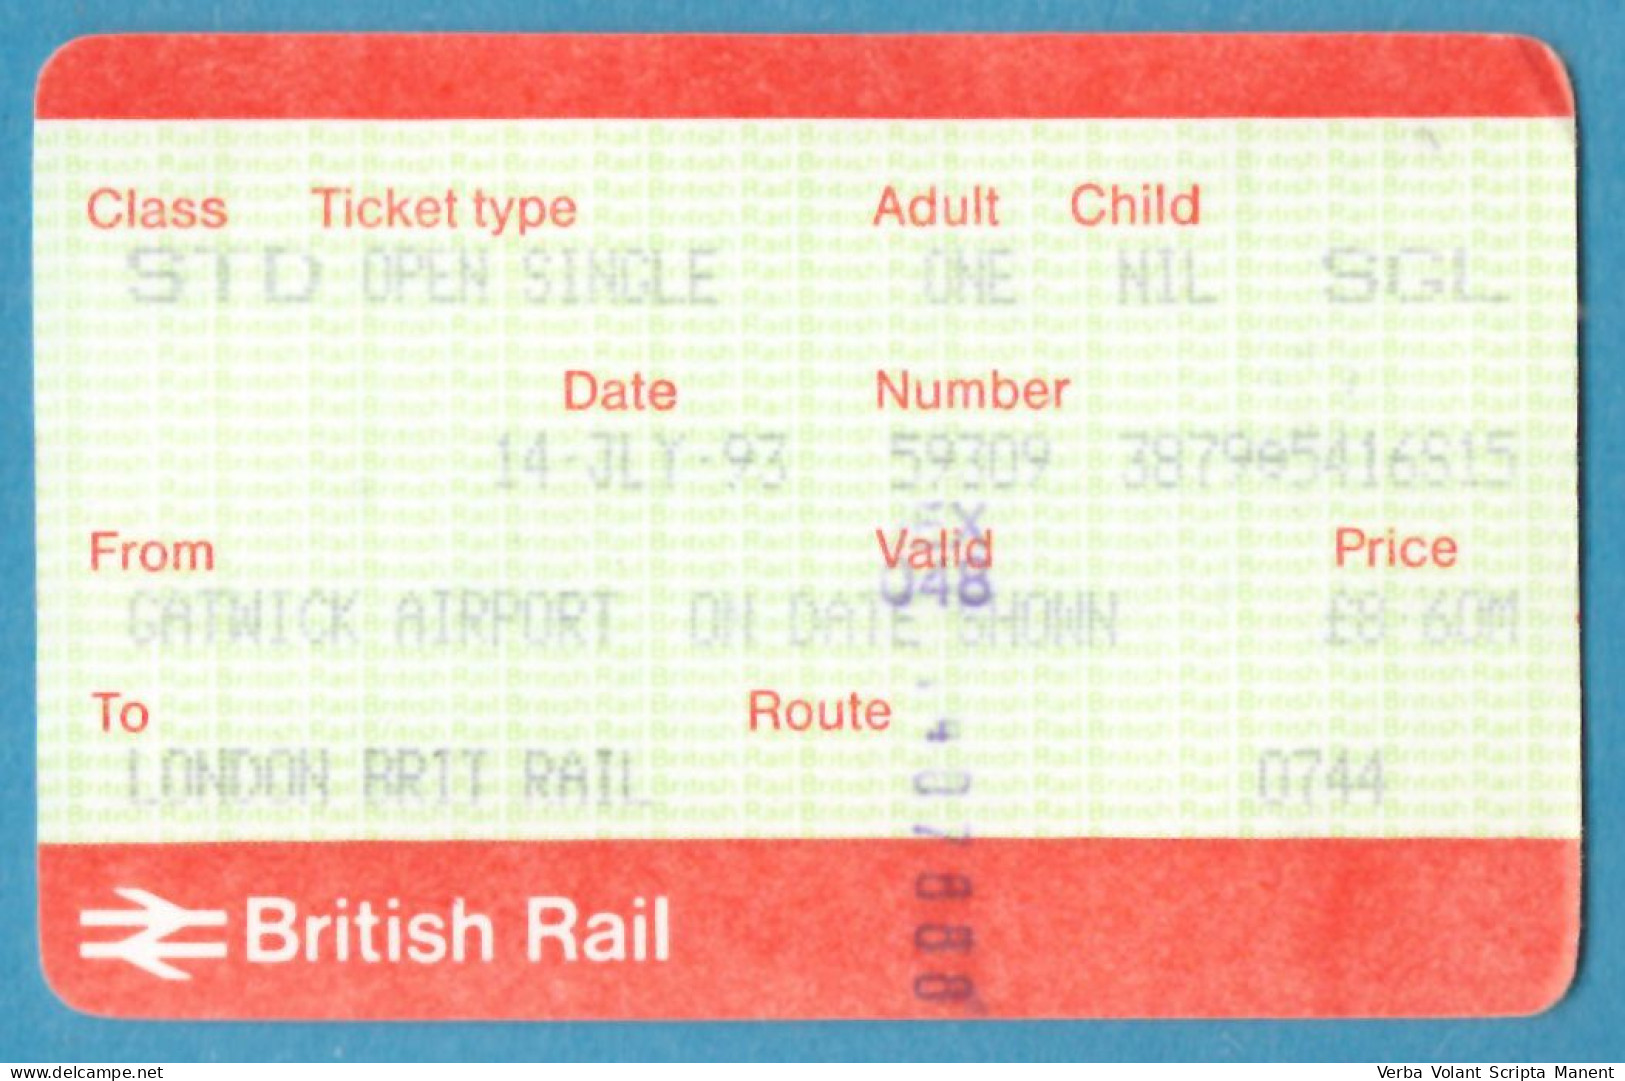 H-0600 * Great Britain - British Rail Ticket From Gatwick Airport To London Brit Rail, 1993 - Europe